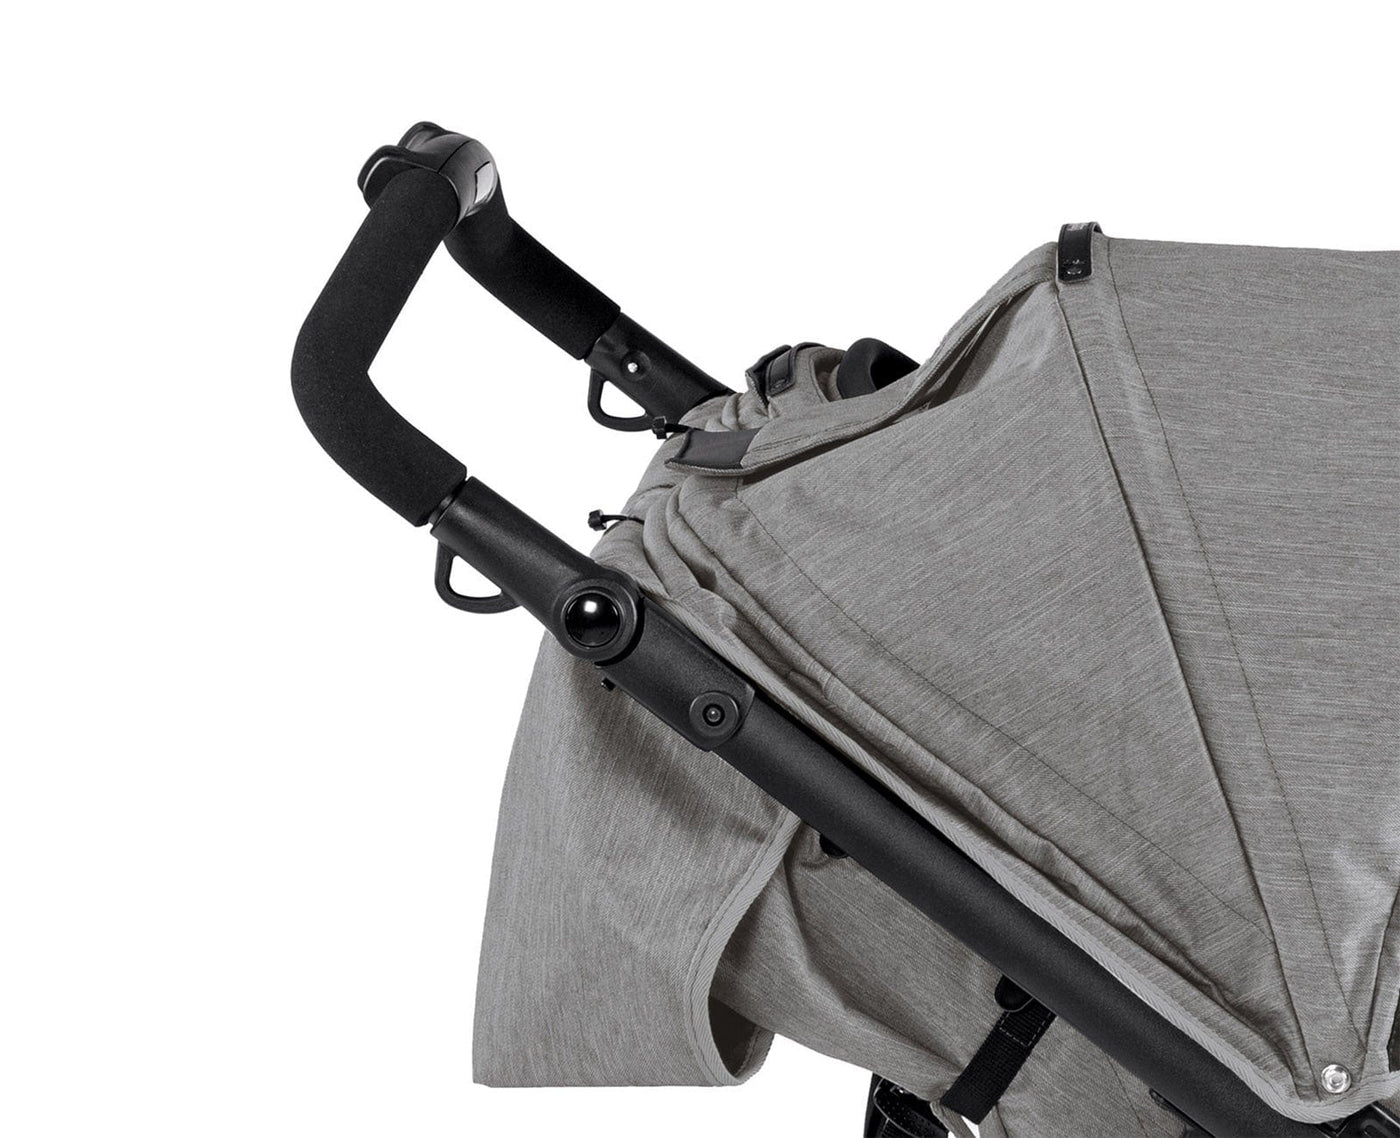 Peg Perego Book for Two Atmosphere